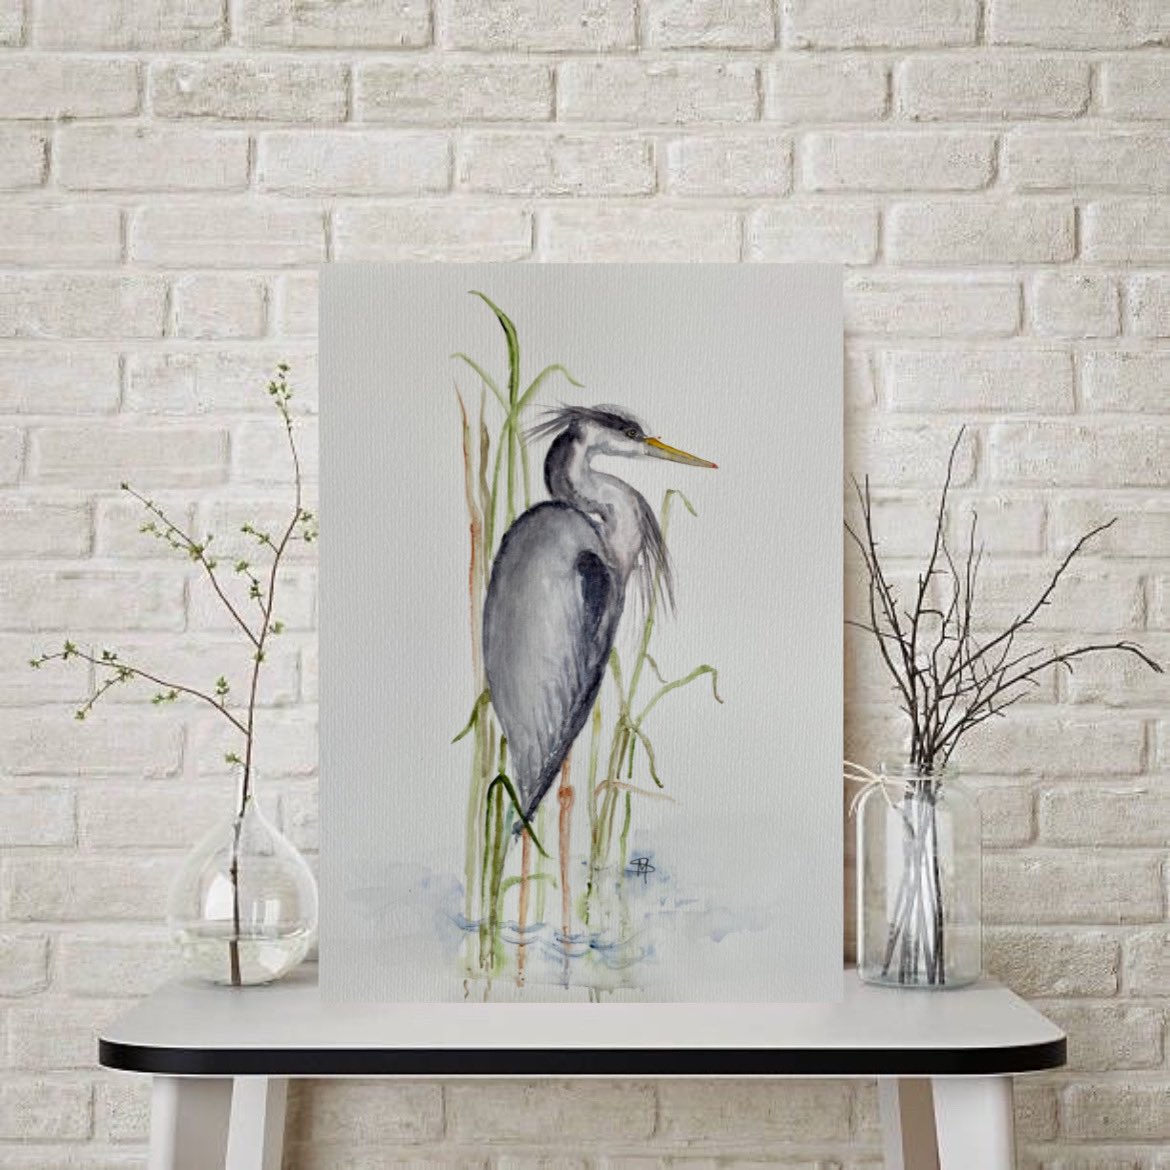 Several Native American Tribes look at the heron symbol as signs of patience and good luck #heron #birdlovers #birdpaintings #birdpainting #watercolourartist #watercolours #artwork #artist #art #britishwildlife #watercolourart #watercoloursbysarah #watercolour #watercolourpaint